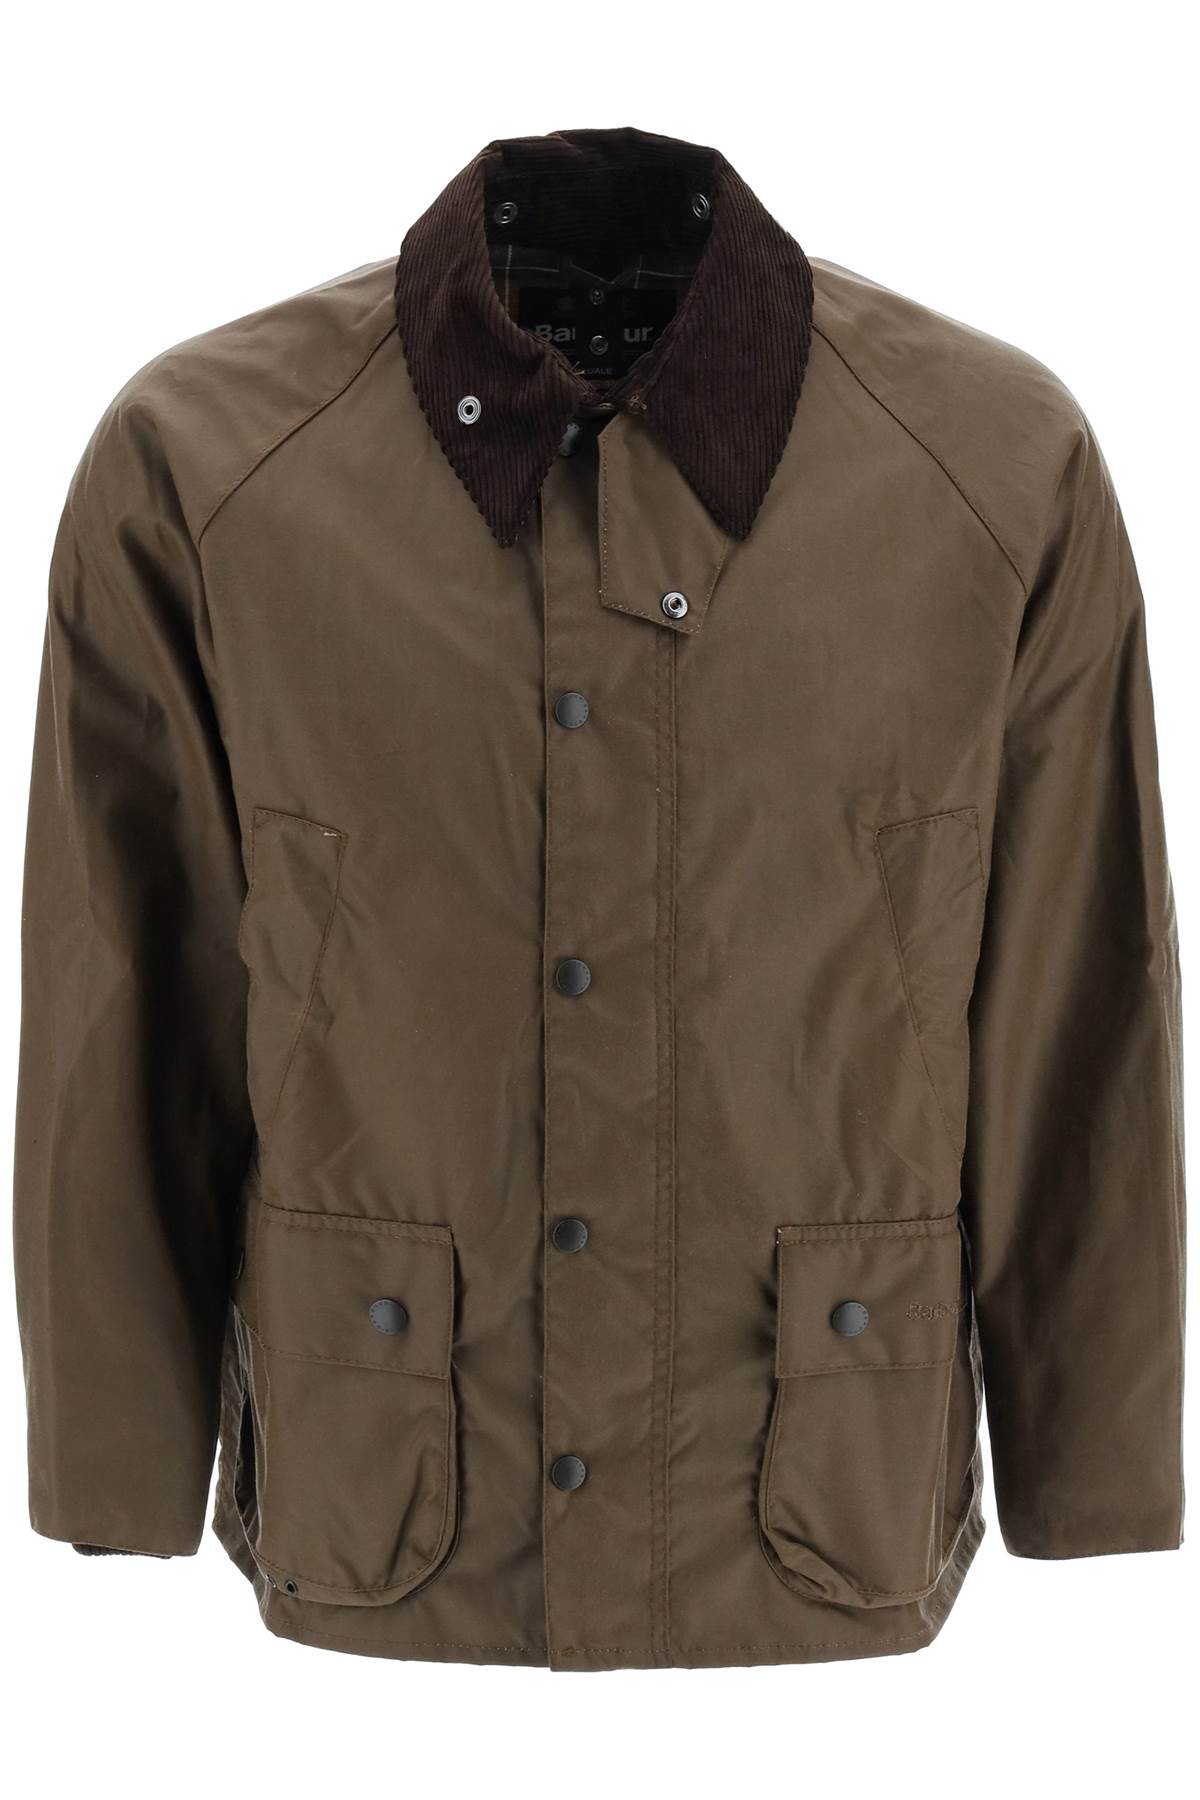 BARBOUR CLASSIC BEDAL JACKET IN WAXED COTTON